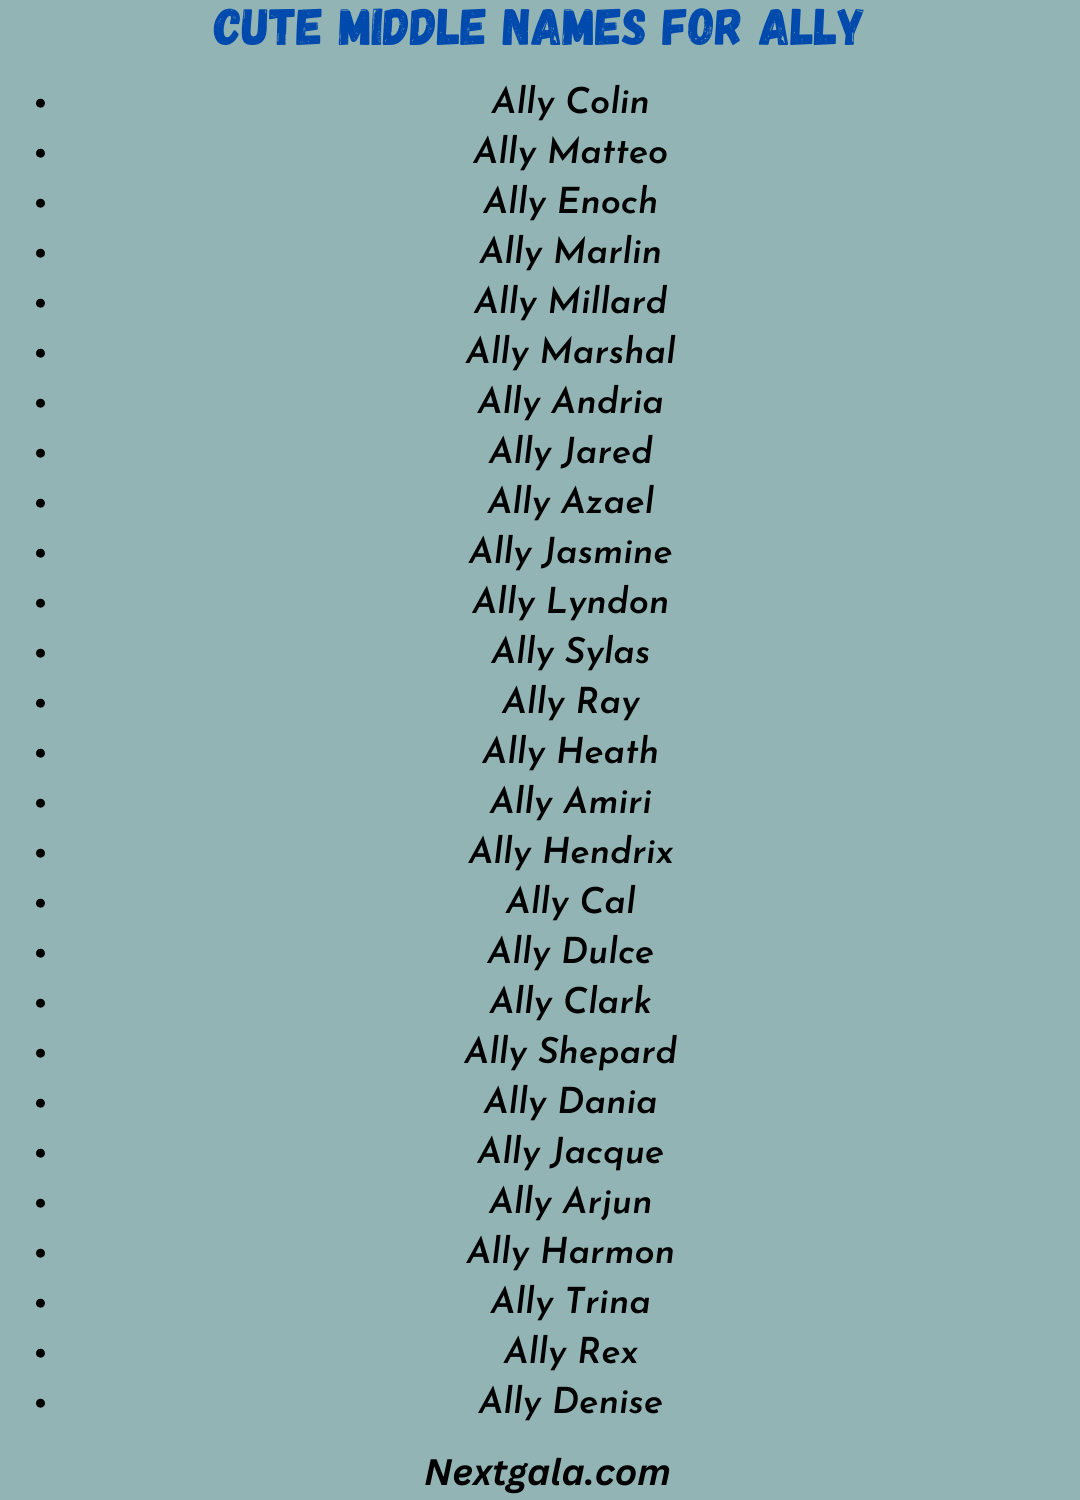 Cute Middle Names for Ally